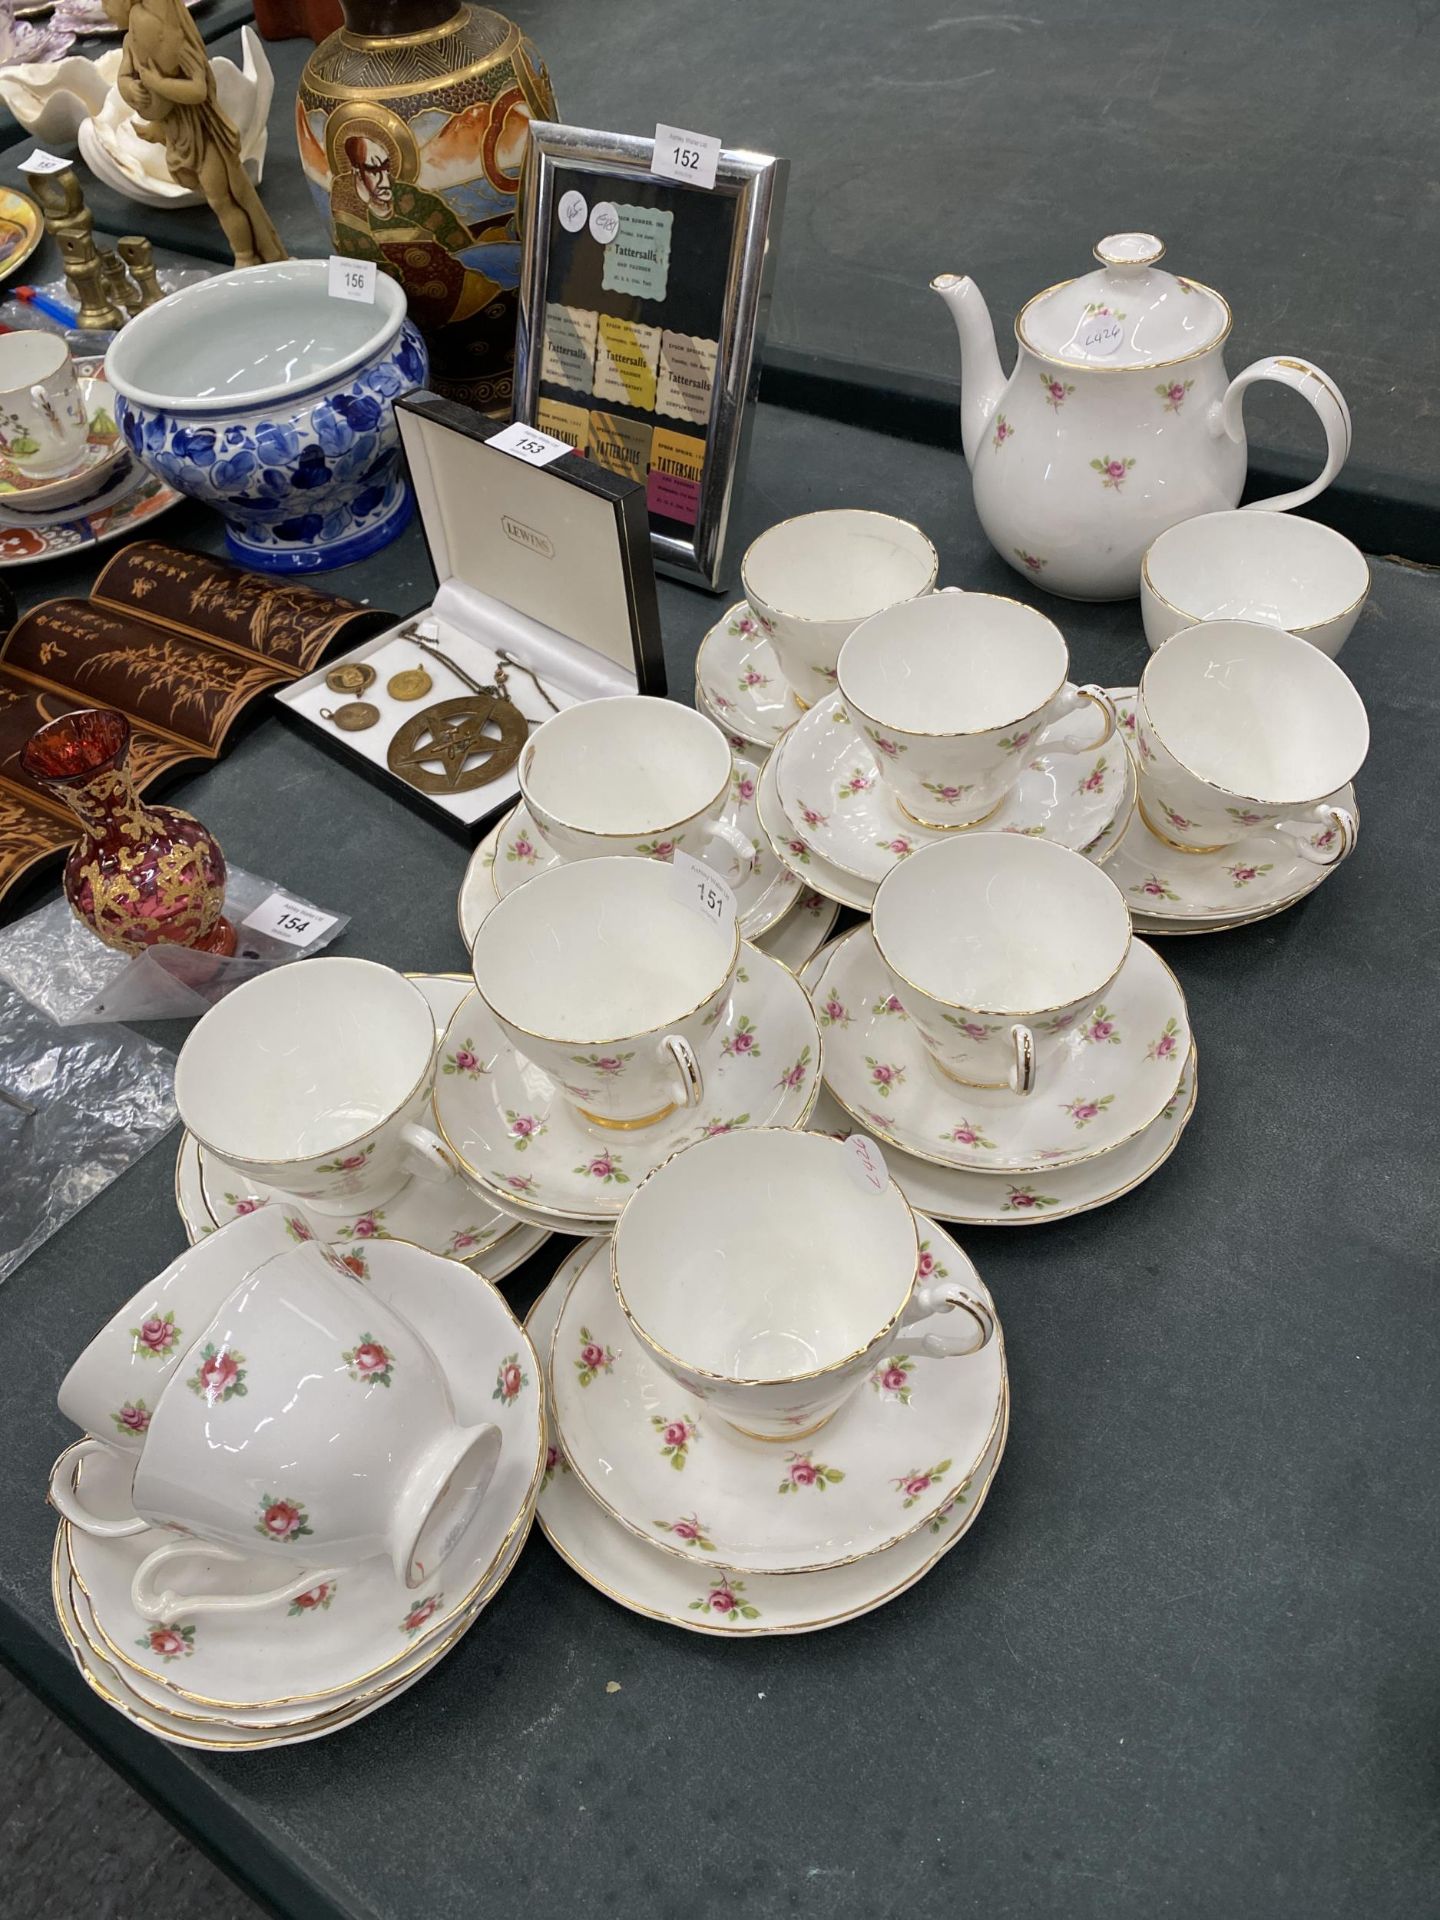 A VINTAGE ARGYLE TEASET TO INCLUDE A TEAPOT, SUGAR BOWL, CUPS, SAUCERS AND SIDE PLATES - Image 2 of 5